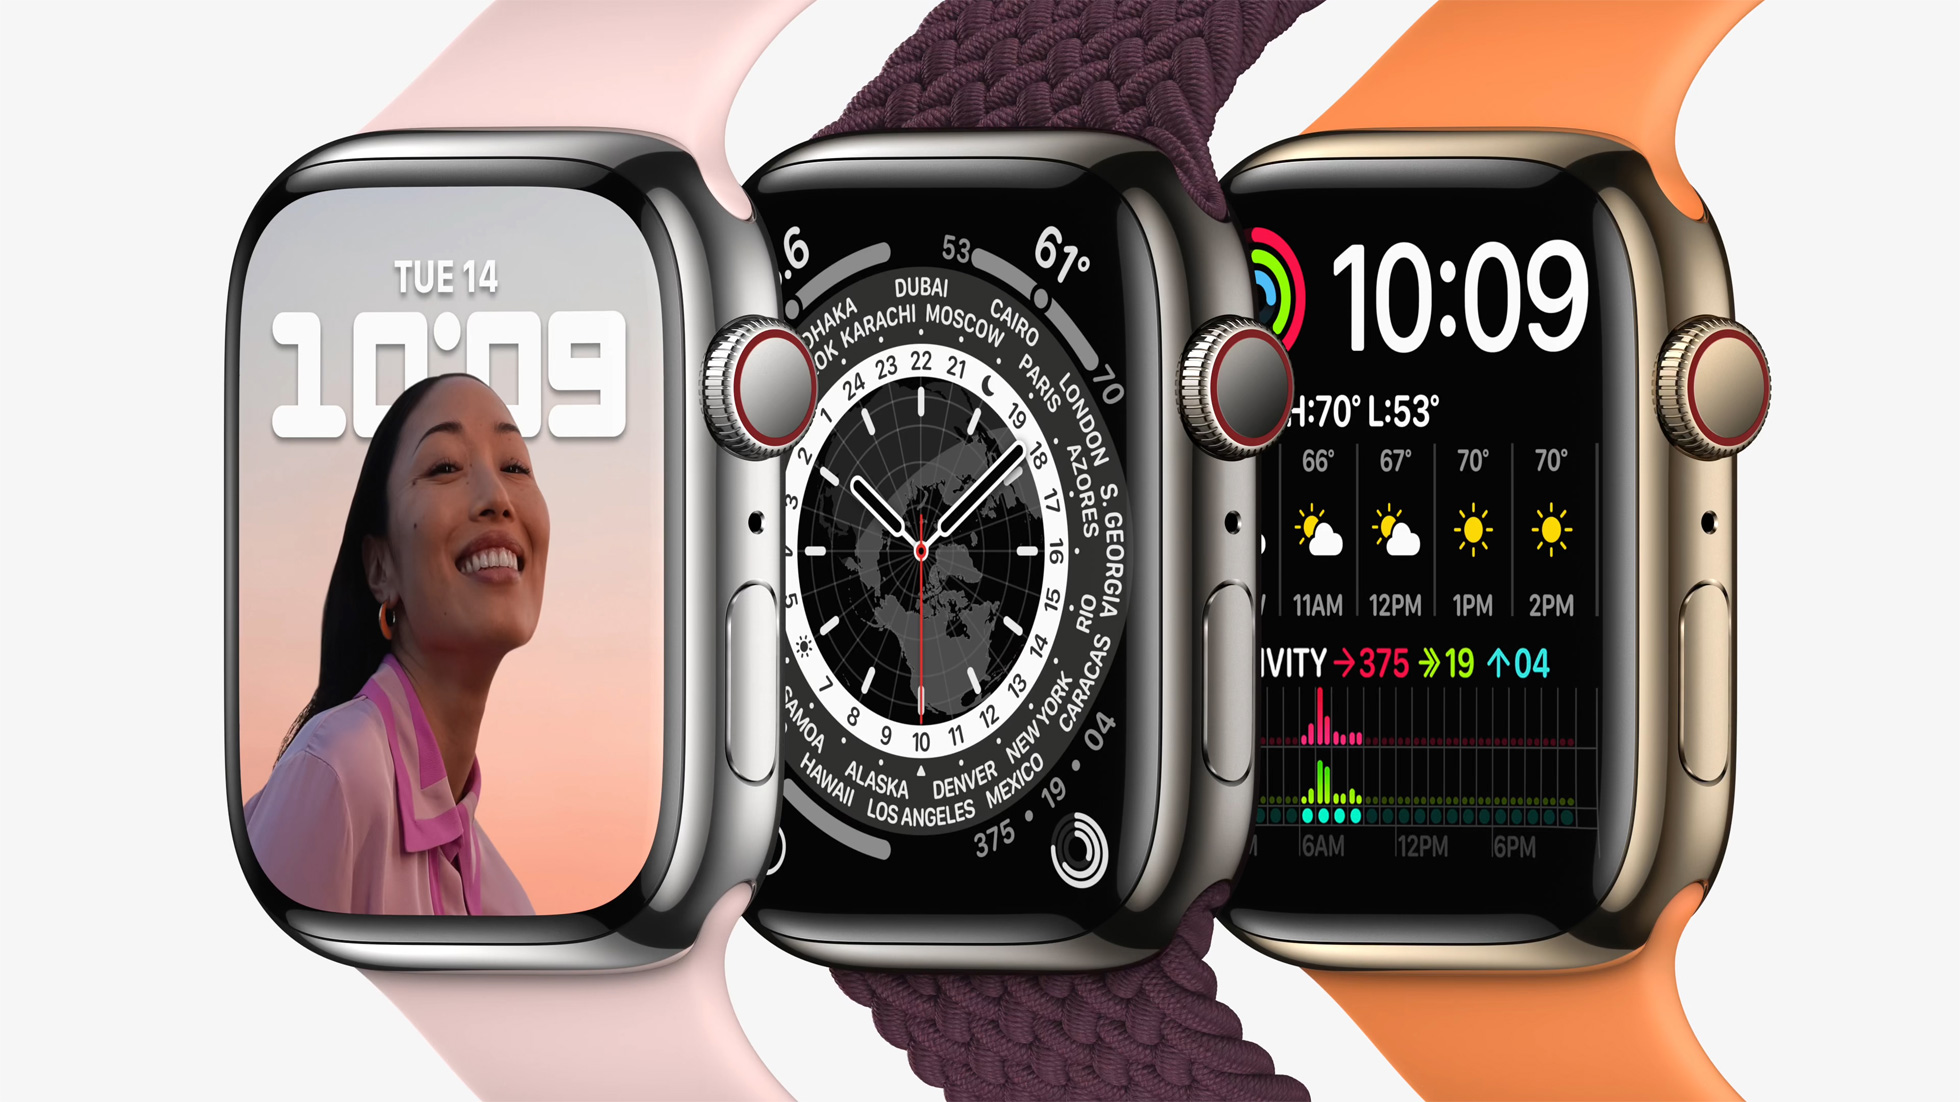 How to Use the Apple Watch Control Center